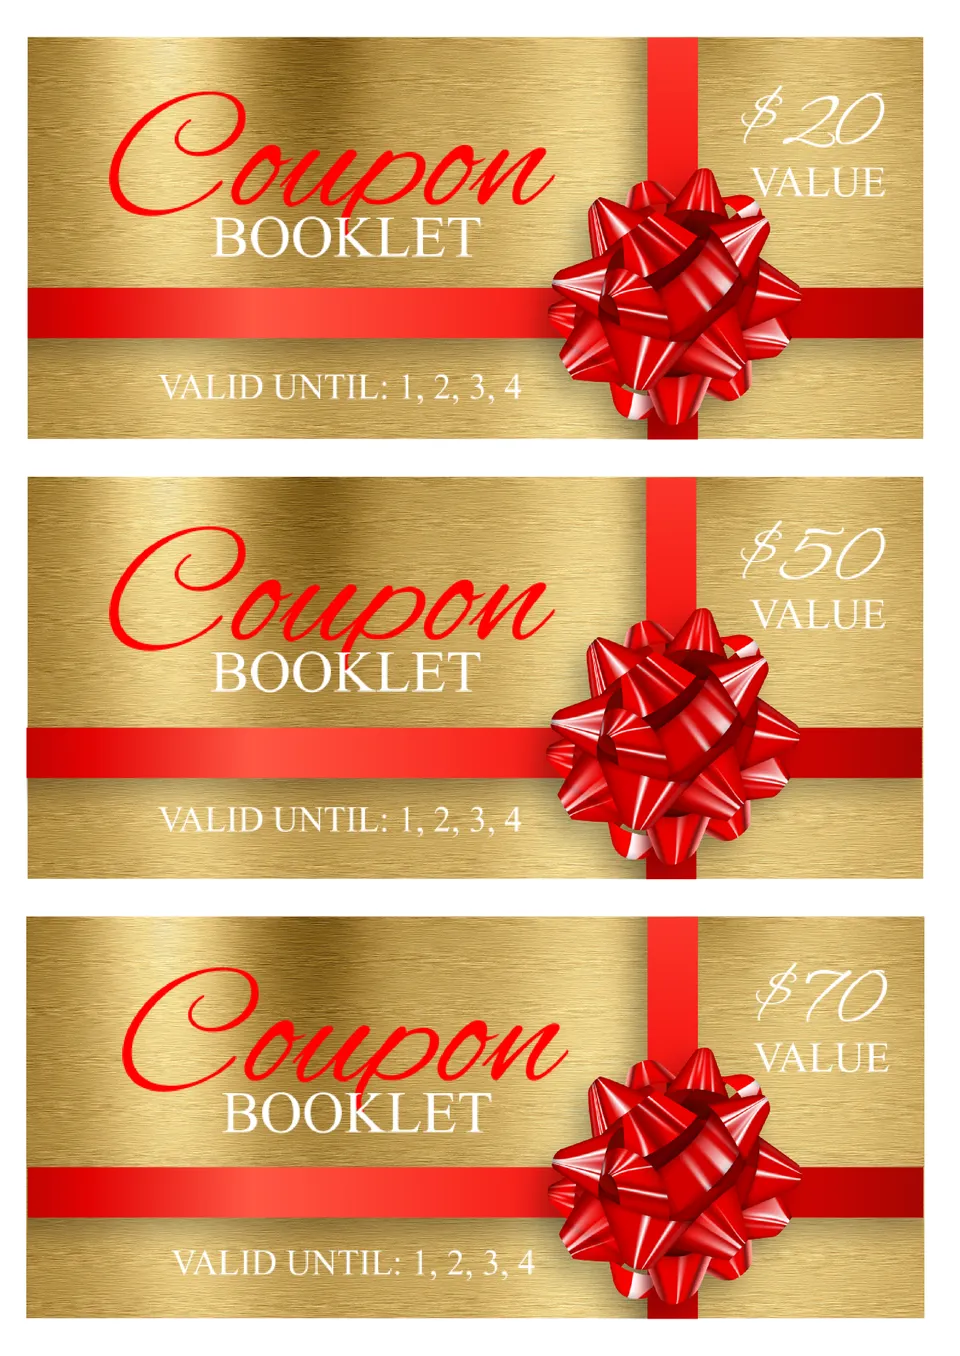 Coupon Booklet Template